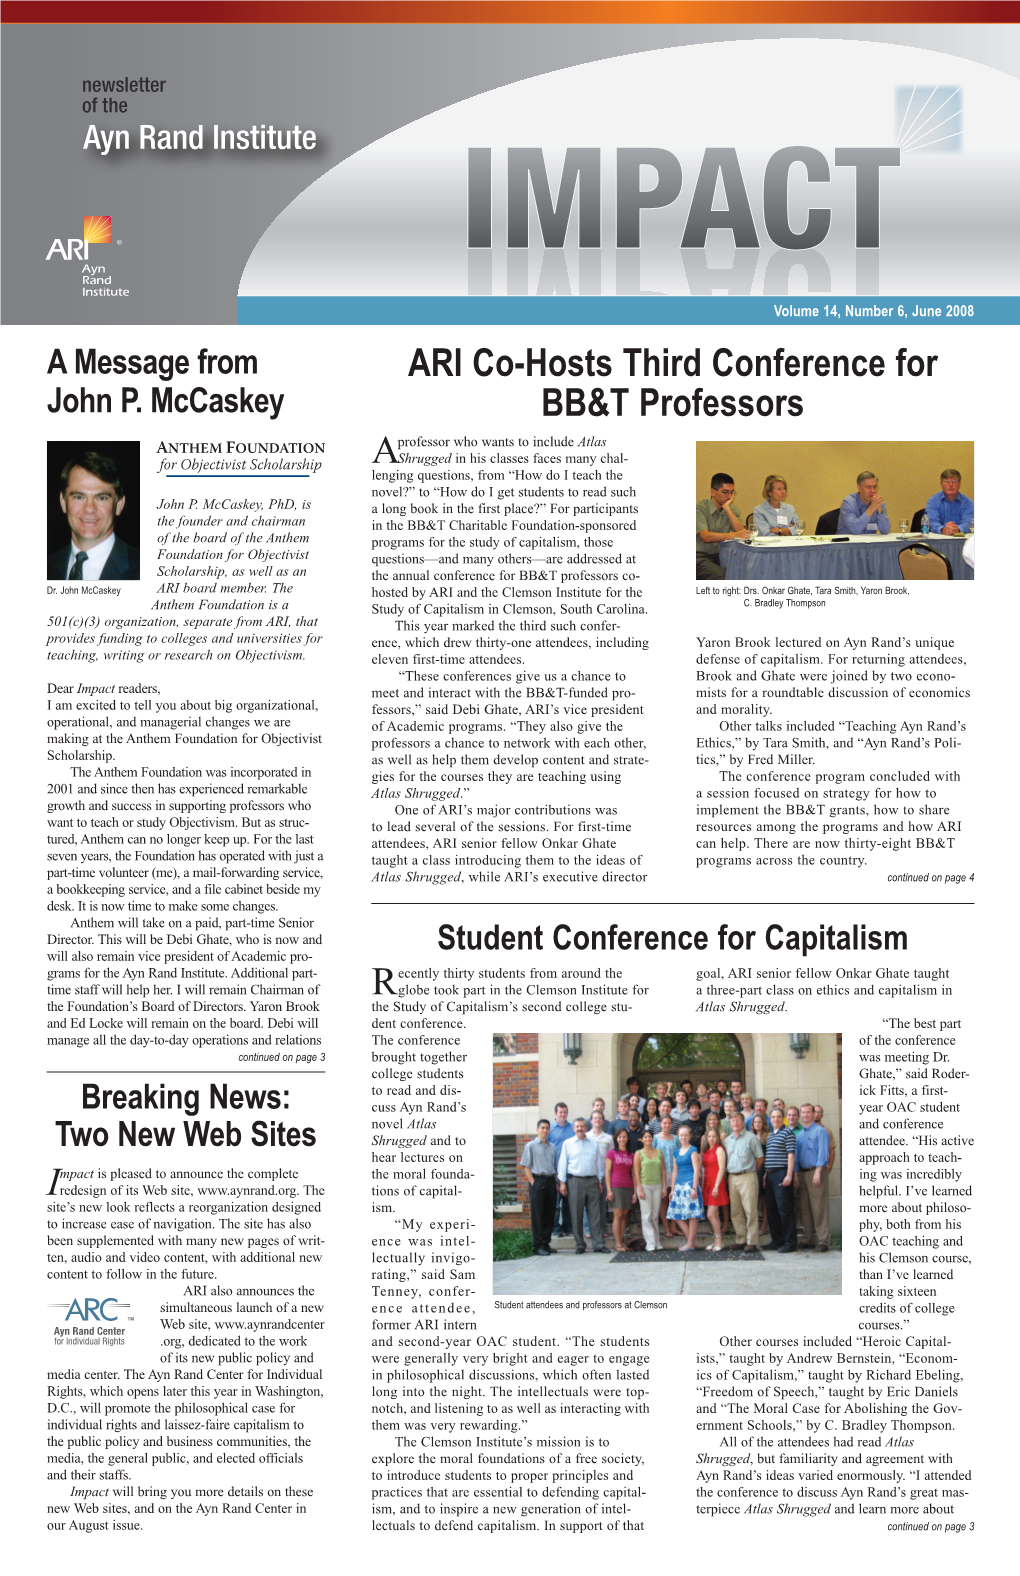 ARI Co-Hosts Third Conference for BB&T Professors